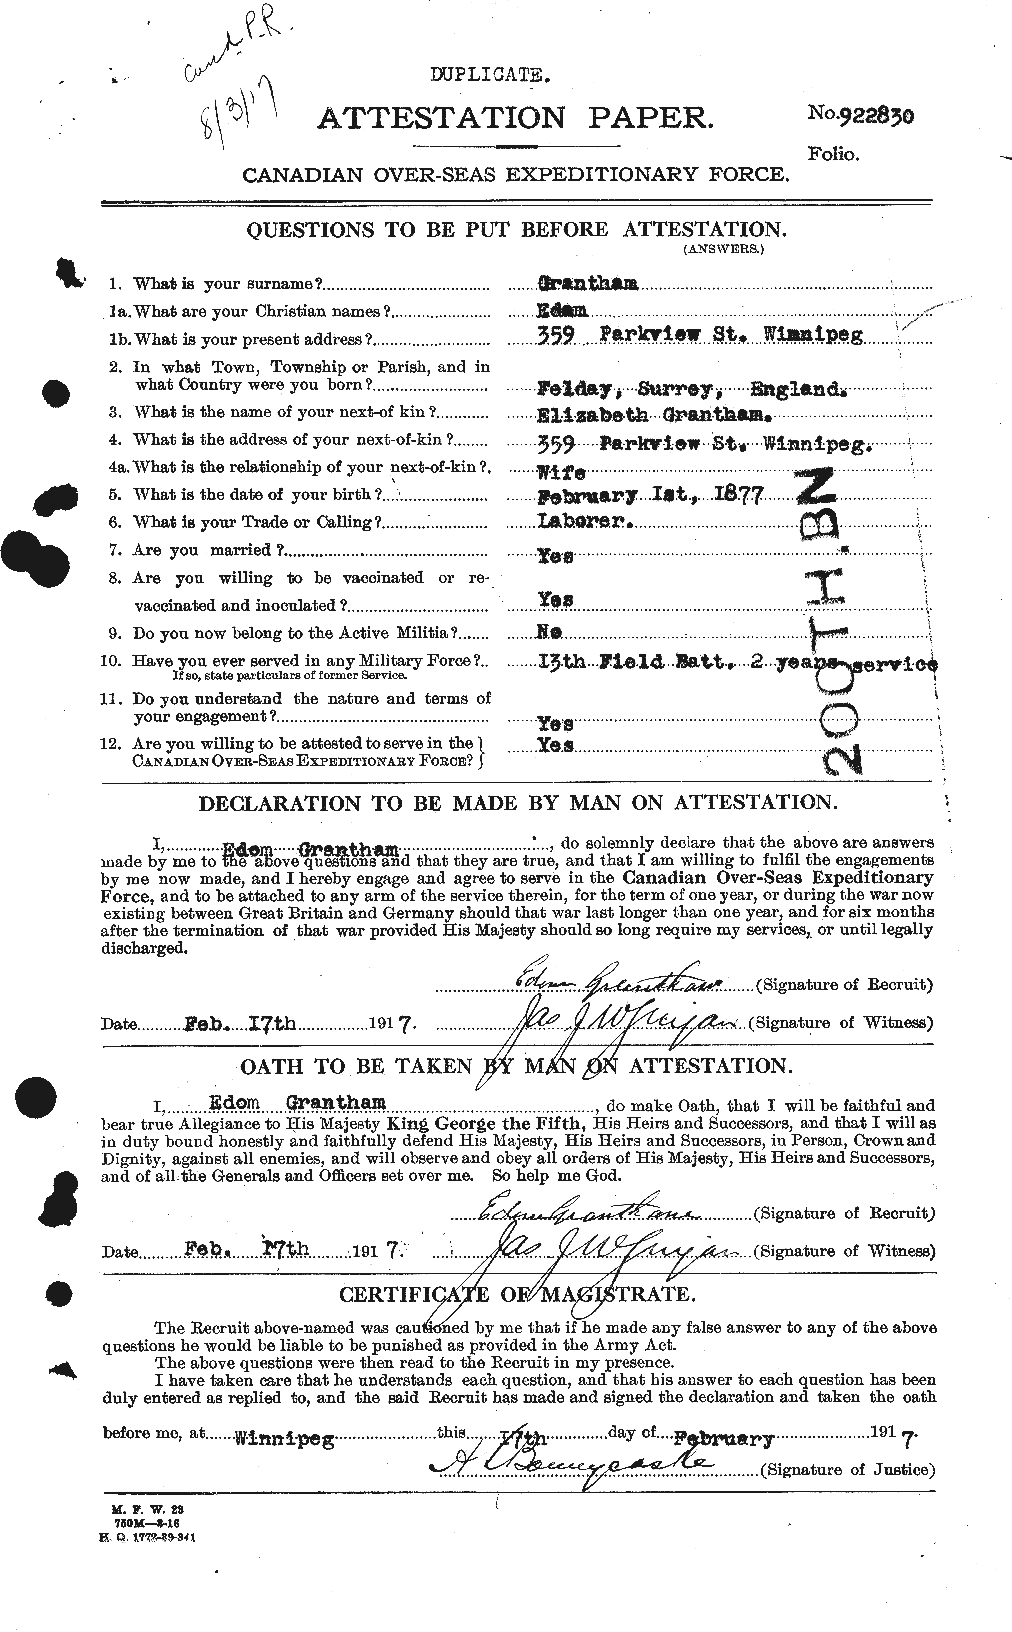 Personnel Records of the First World War - CEF 364408a